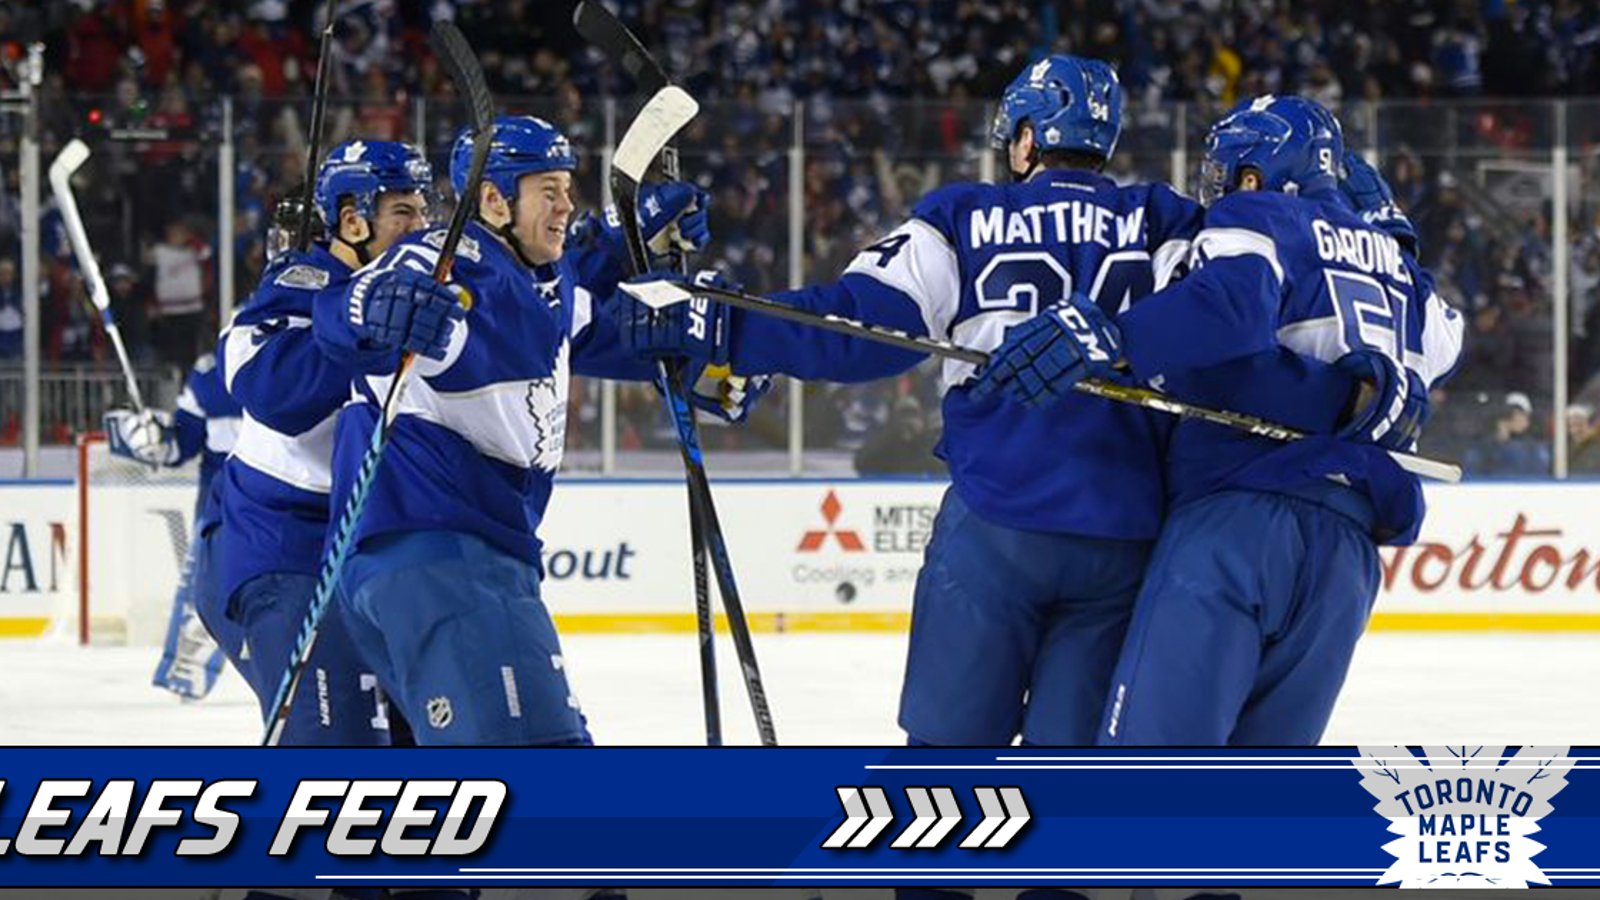 Report: Leafs own second best NHL record since October 31st